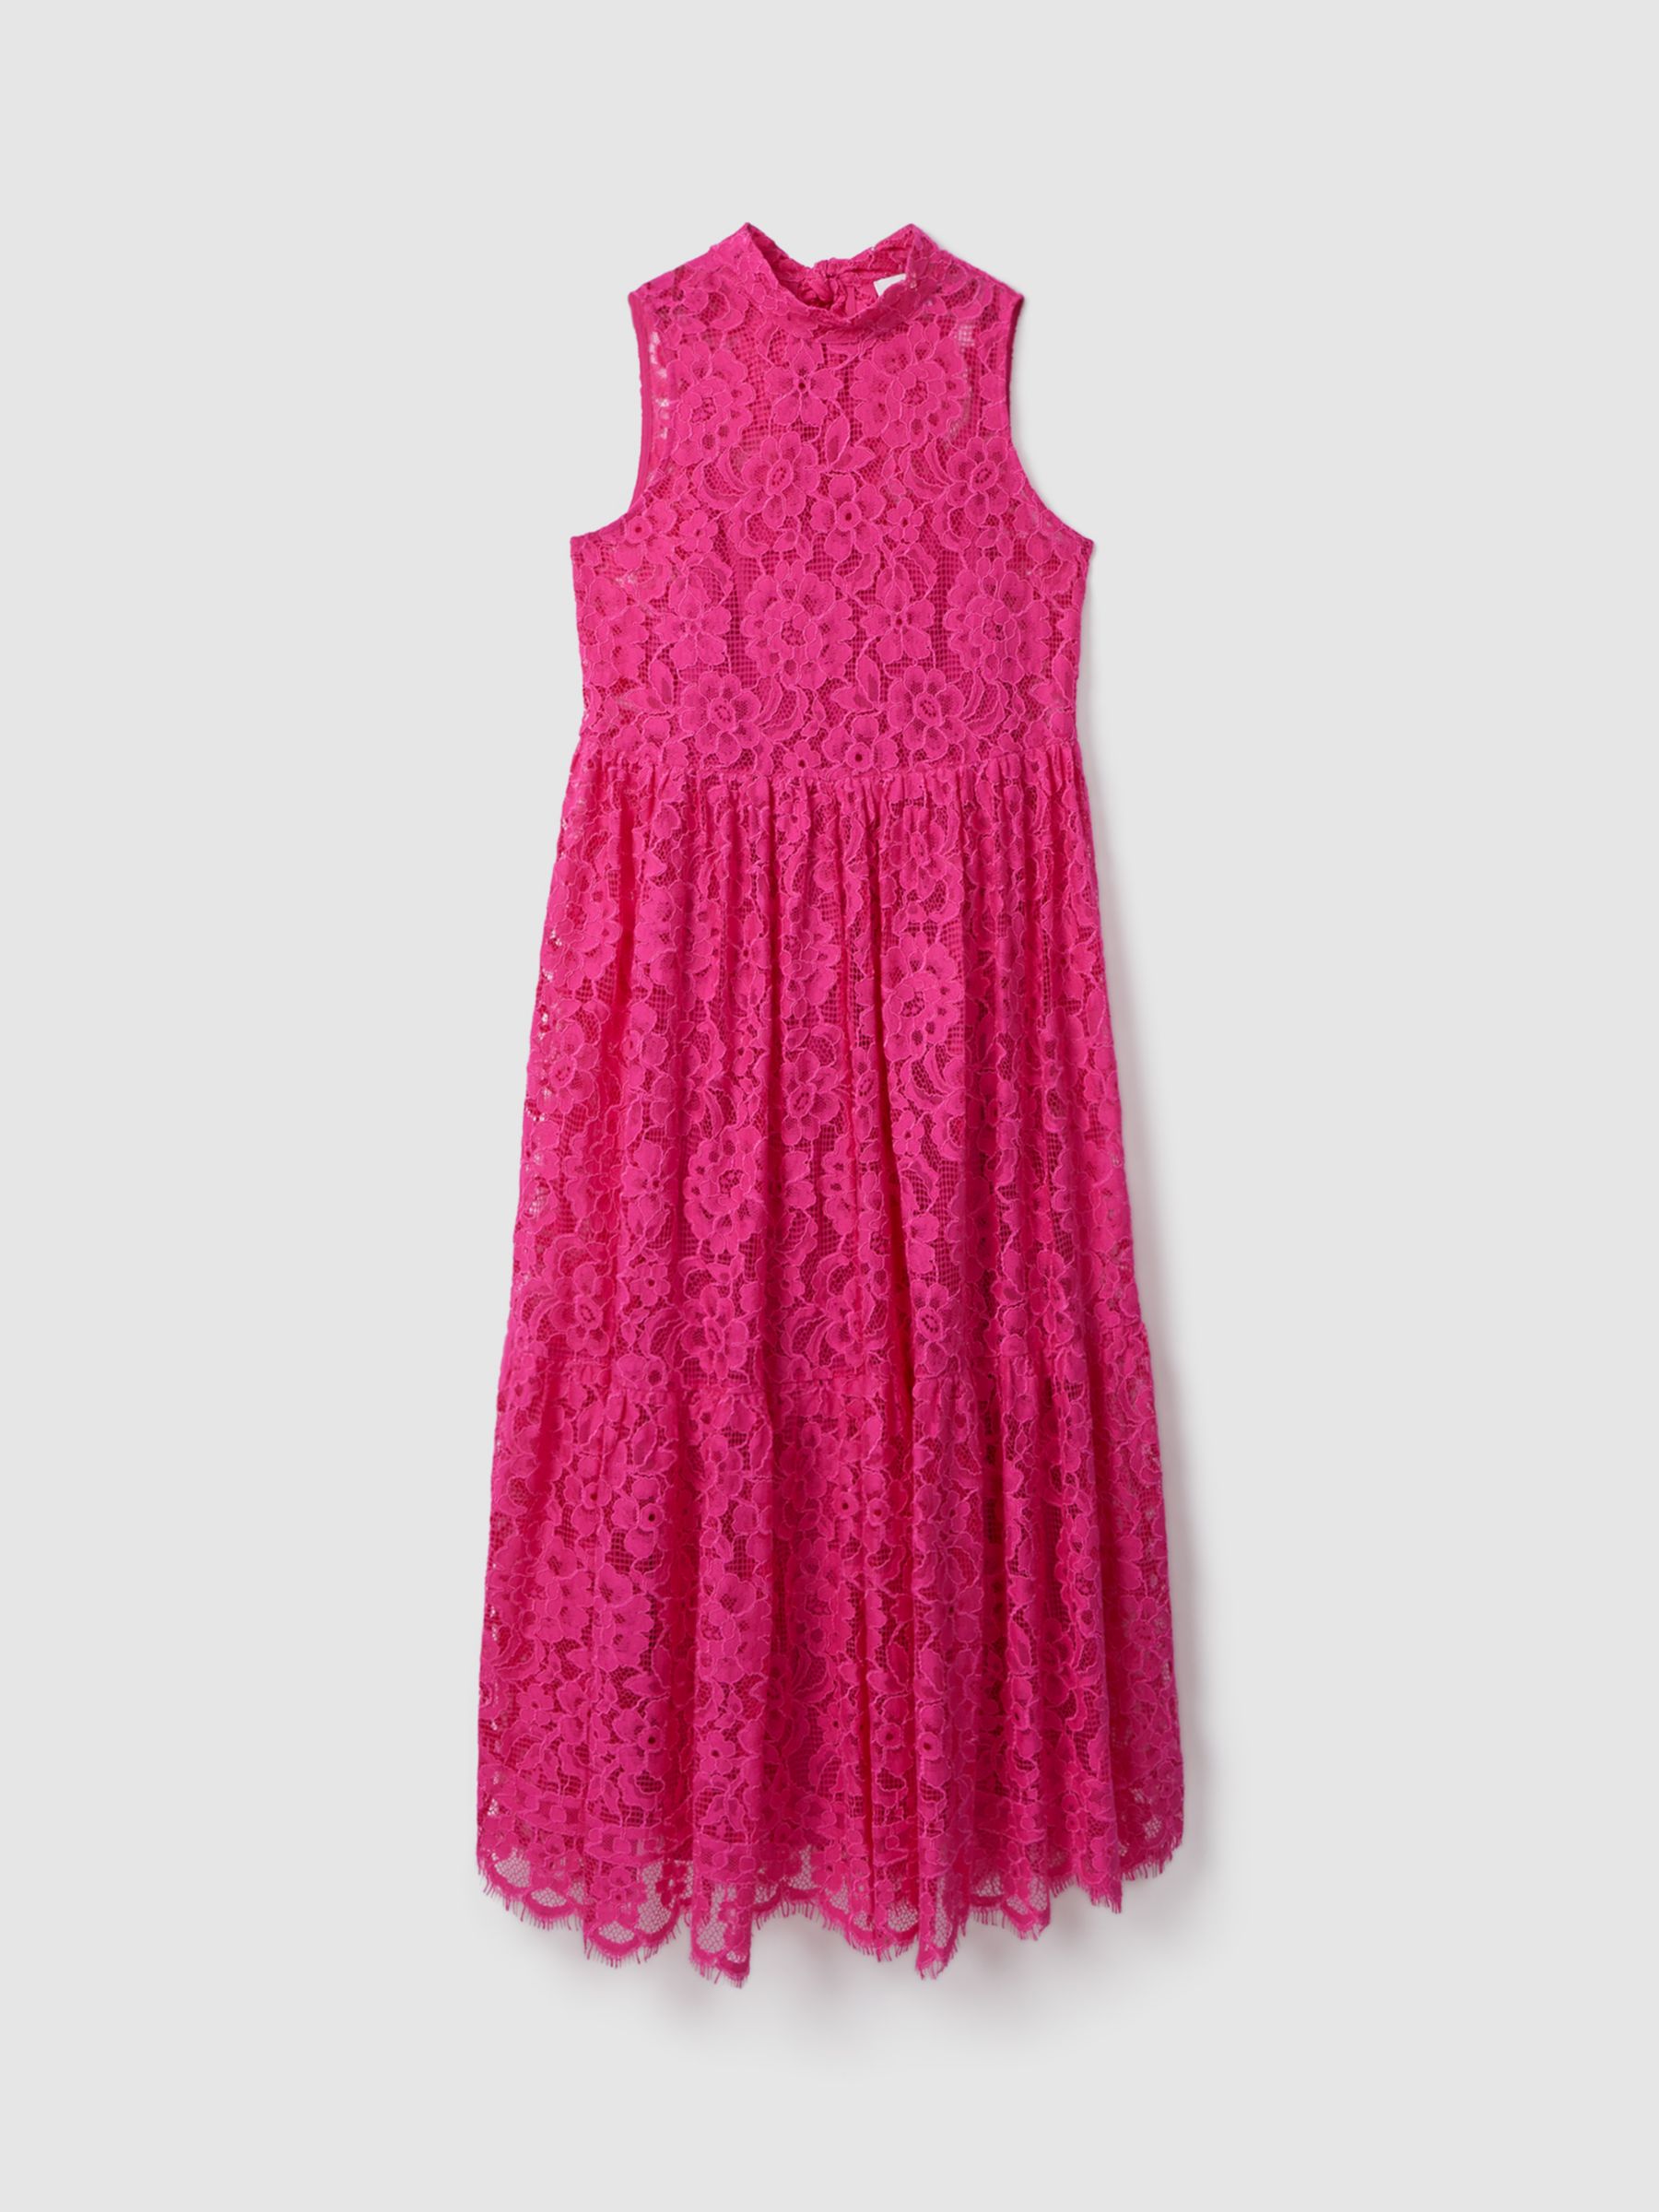 FLORERE High Neck Floral Lace Midi Dress, Bright Pink, 8